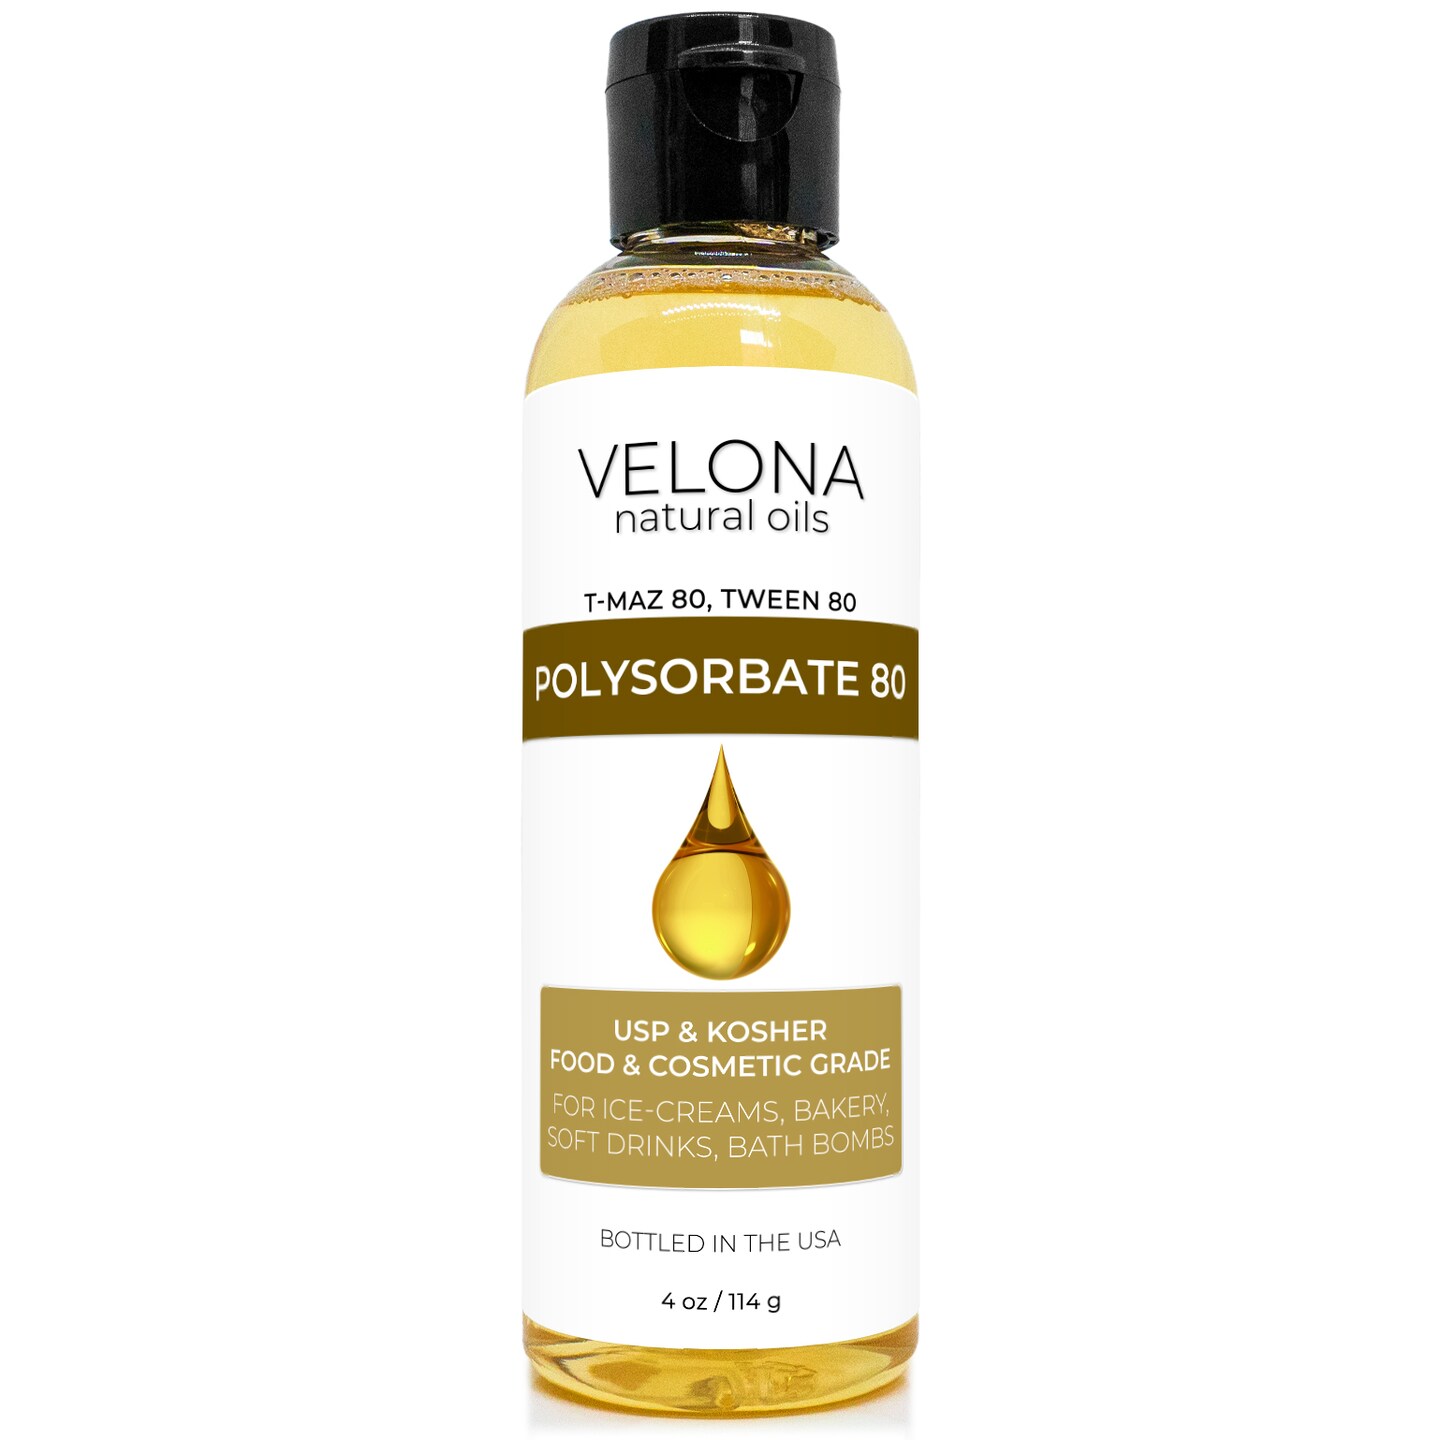 Polysorbate 80 by Velona 4 oz | Solubilizer, Food &#x26; Cosmetic Grade | All Natural for Cooking, Skin Care and Bath Bombs, Sprays, Foam Maker | Use Today - Enjoy Results